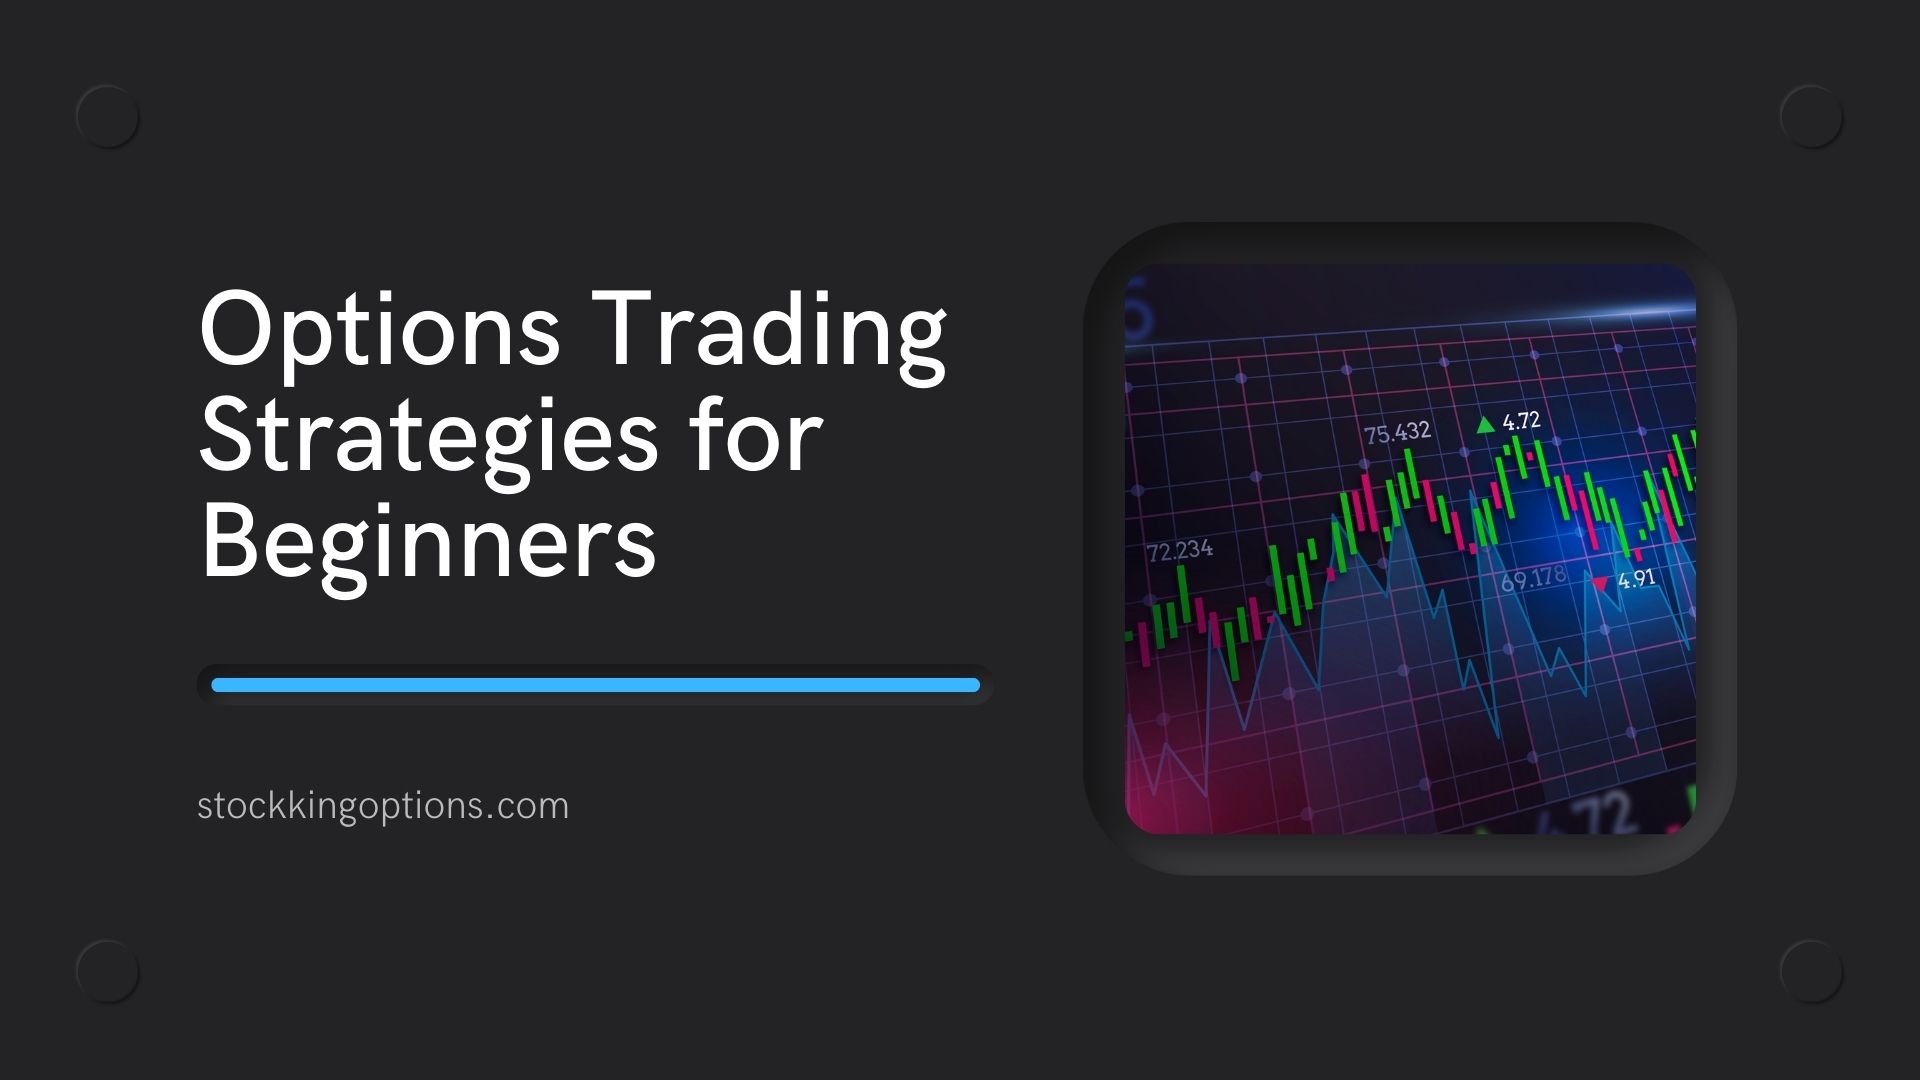 Options Trading Strategies for Beginners